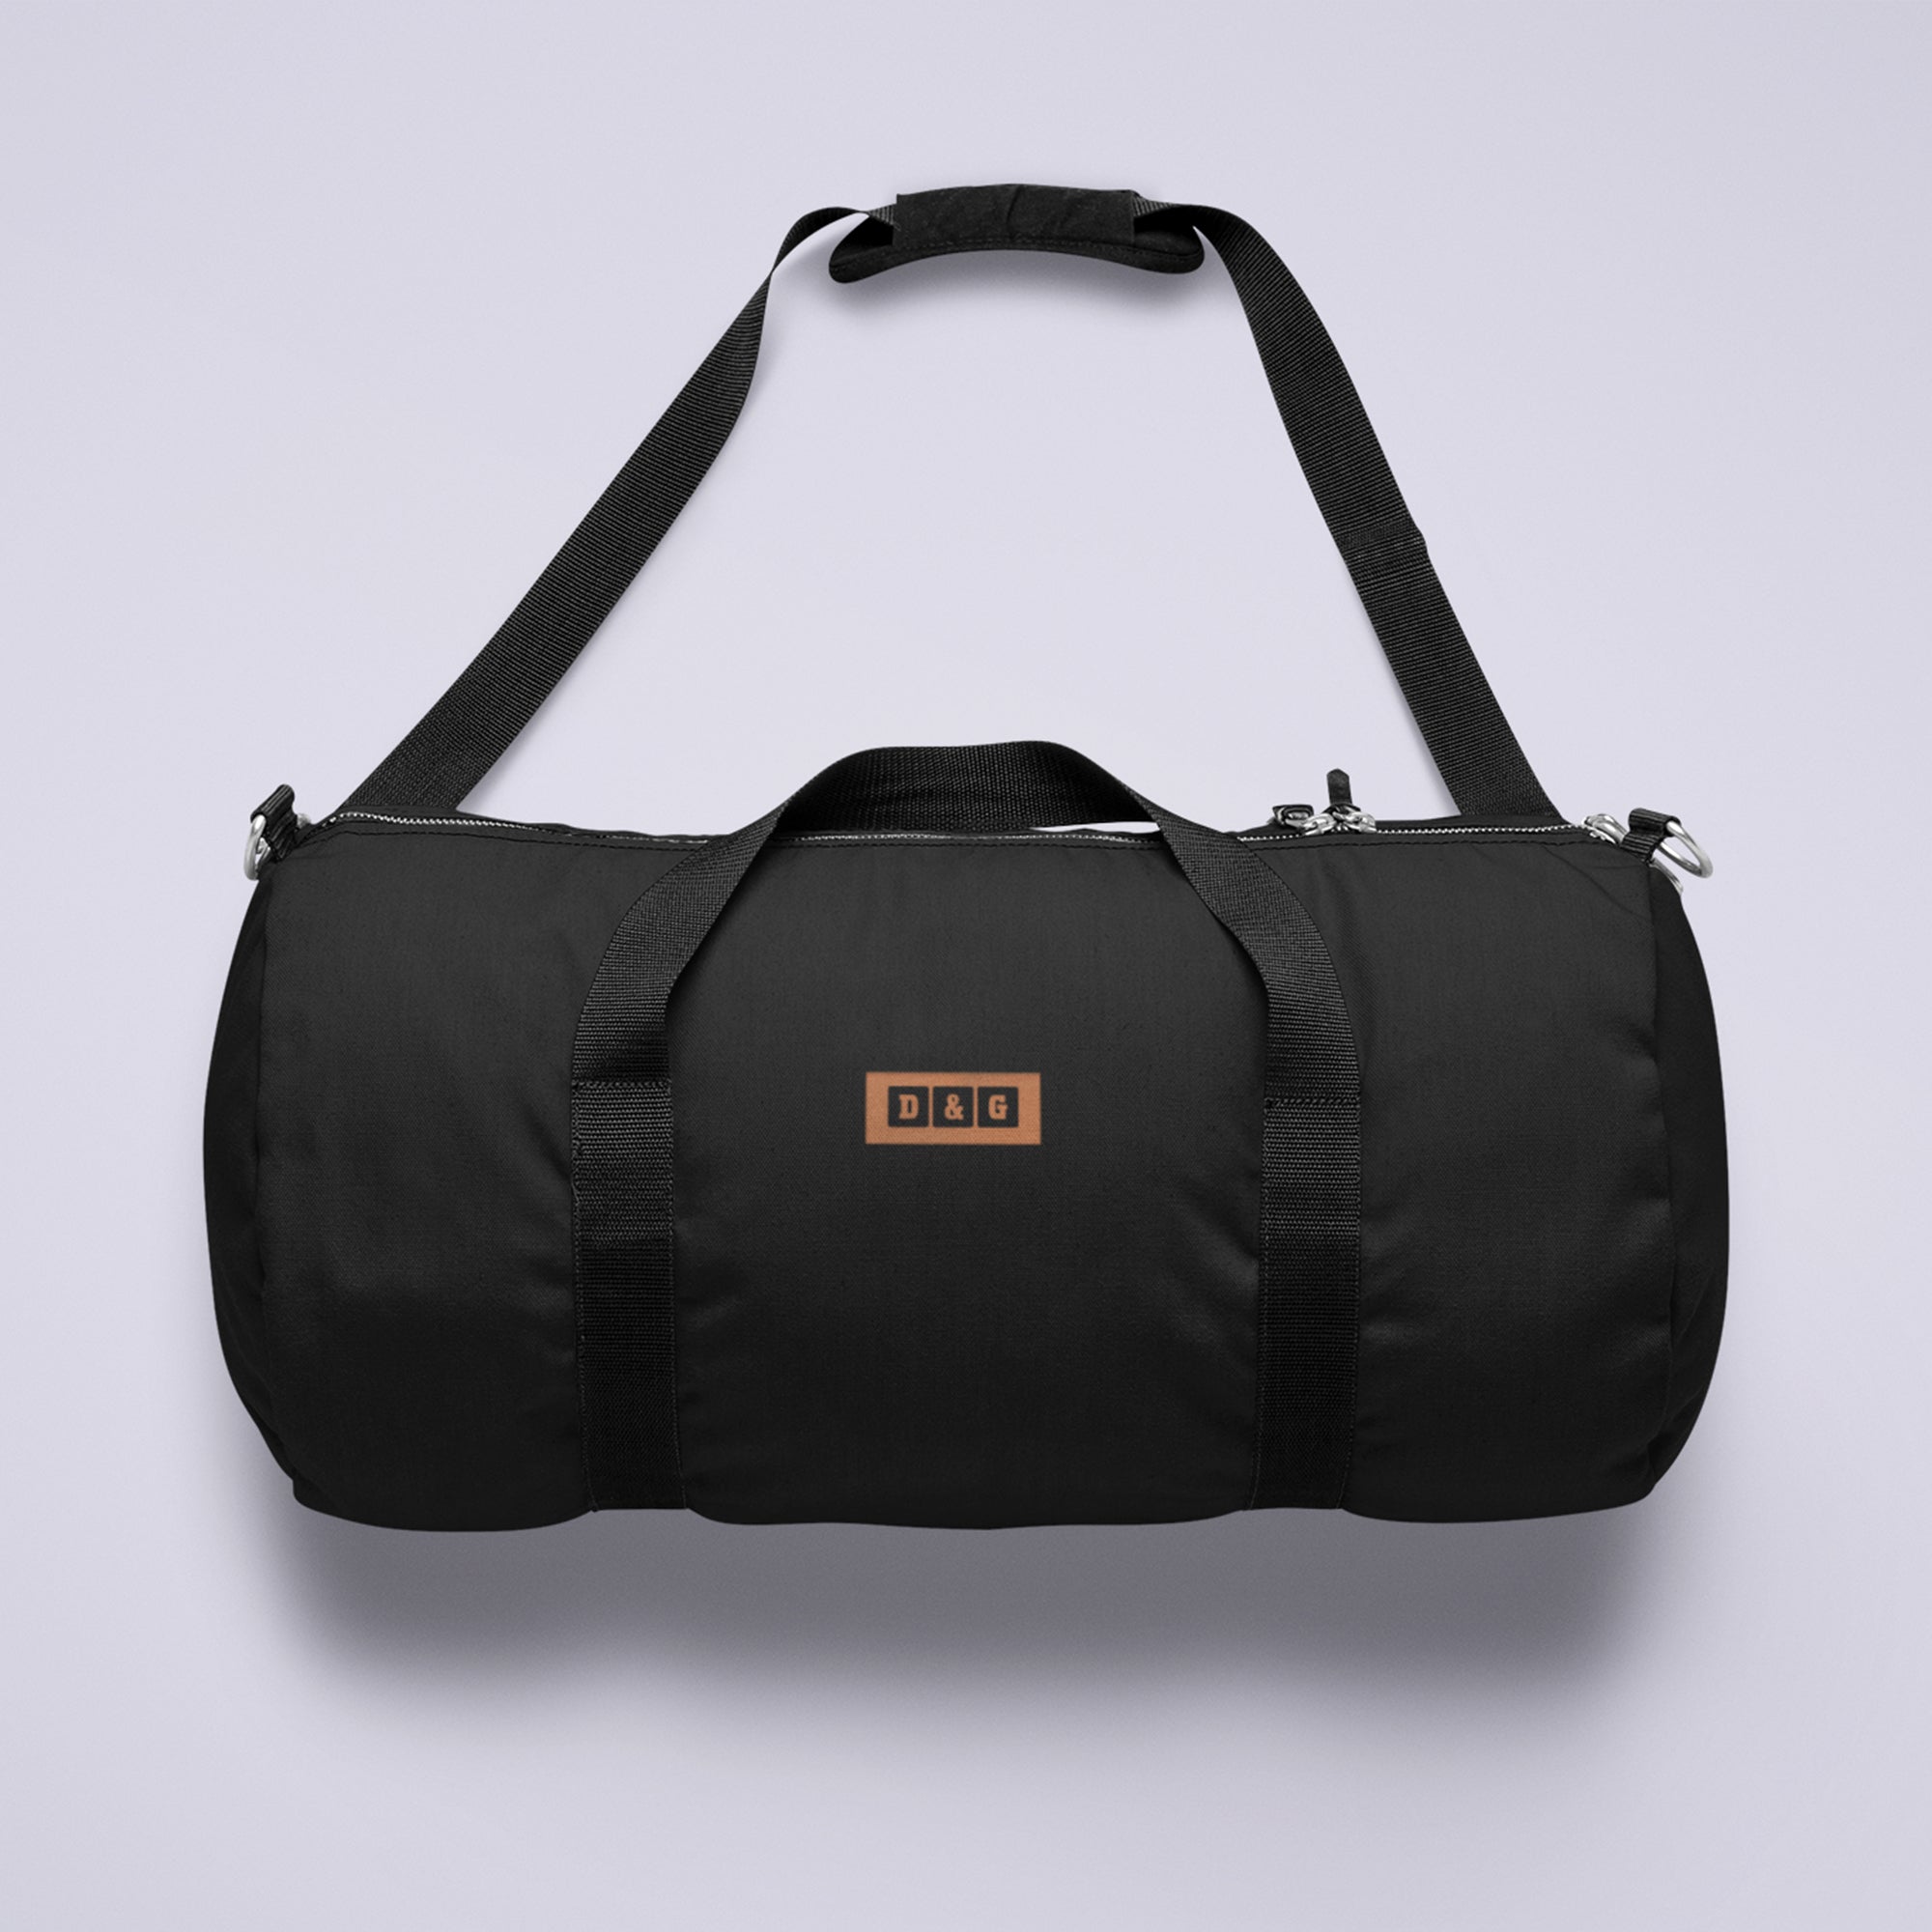 Personalized Couple Duffle Bag